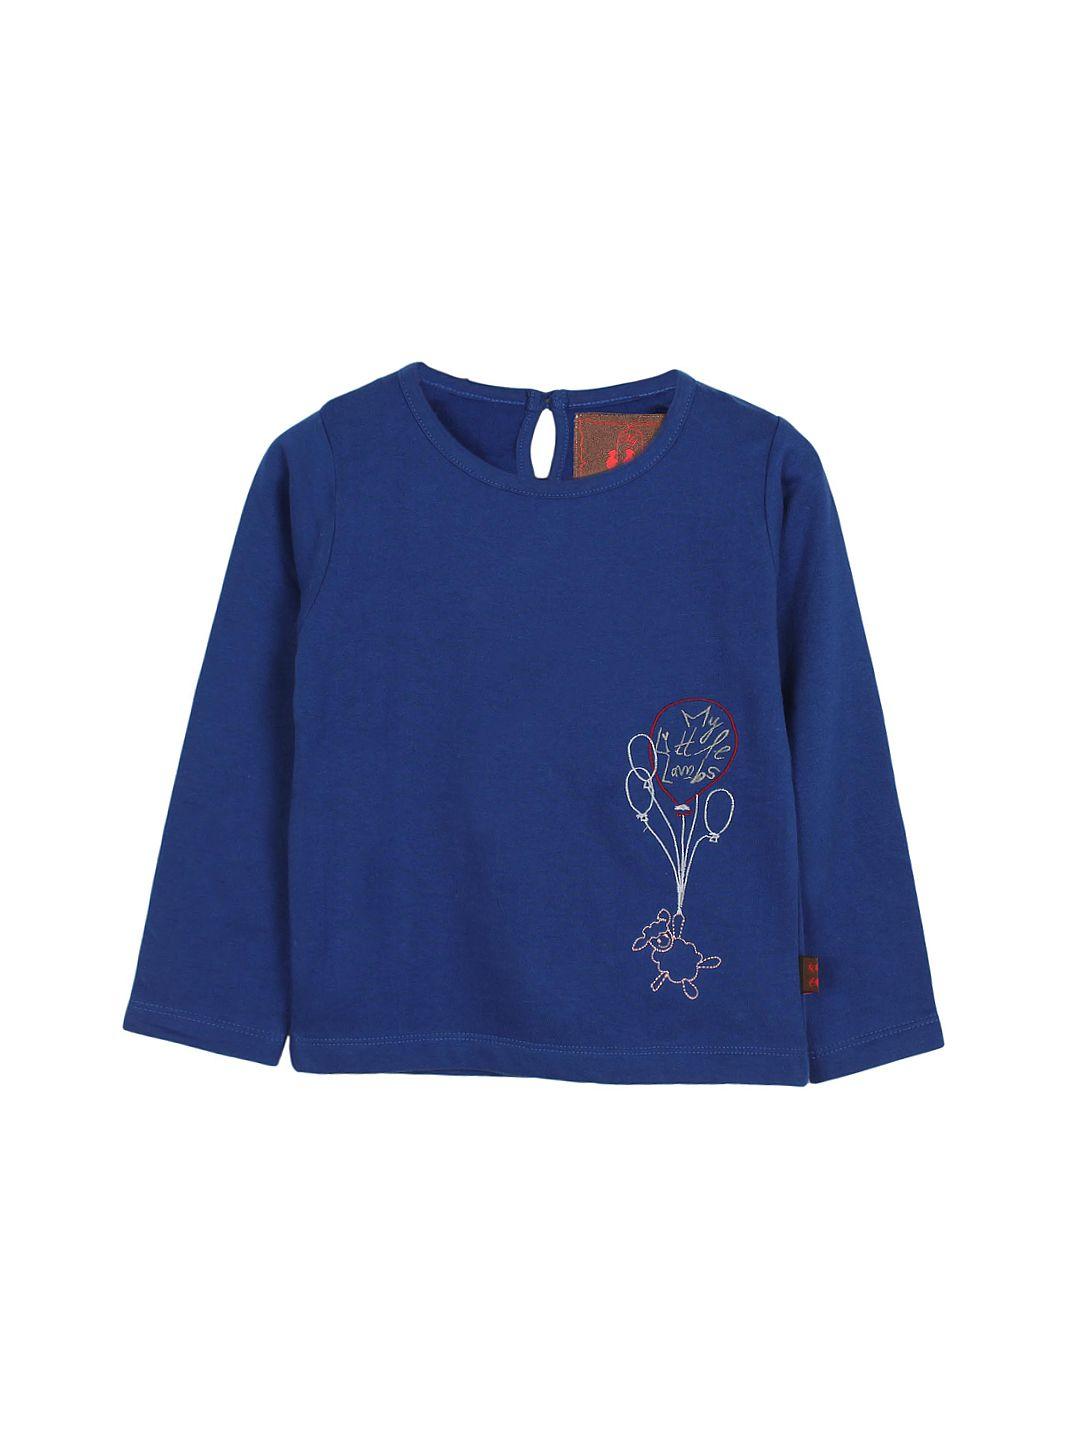 my little lambs unisex blue t-shirt with embroidered detail